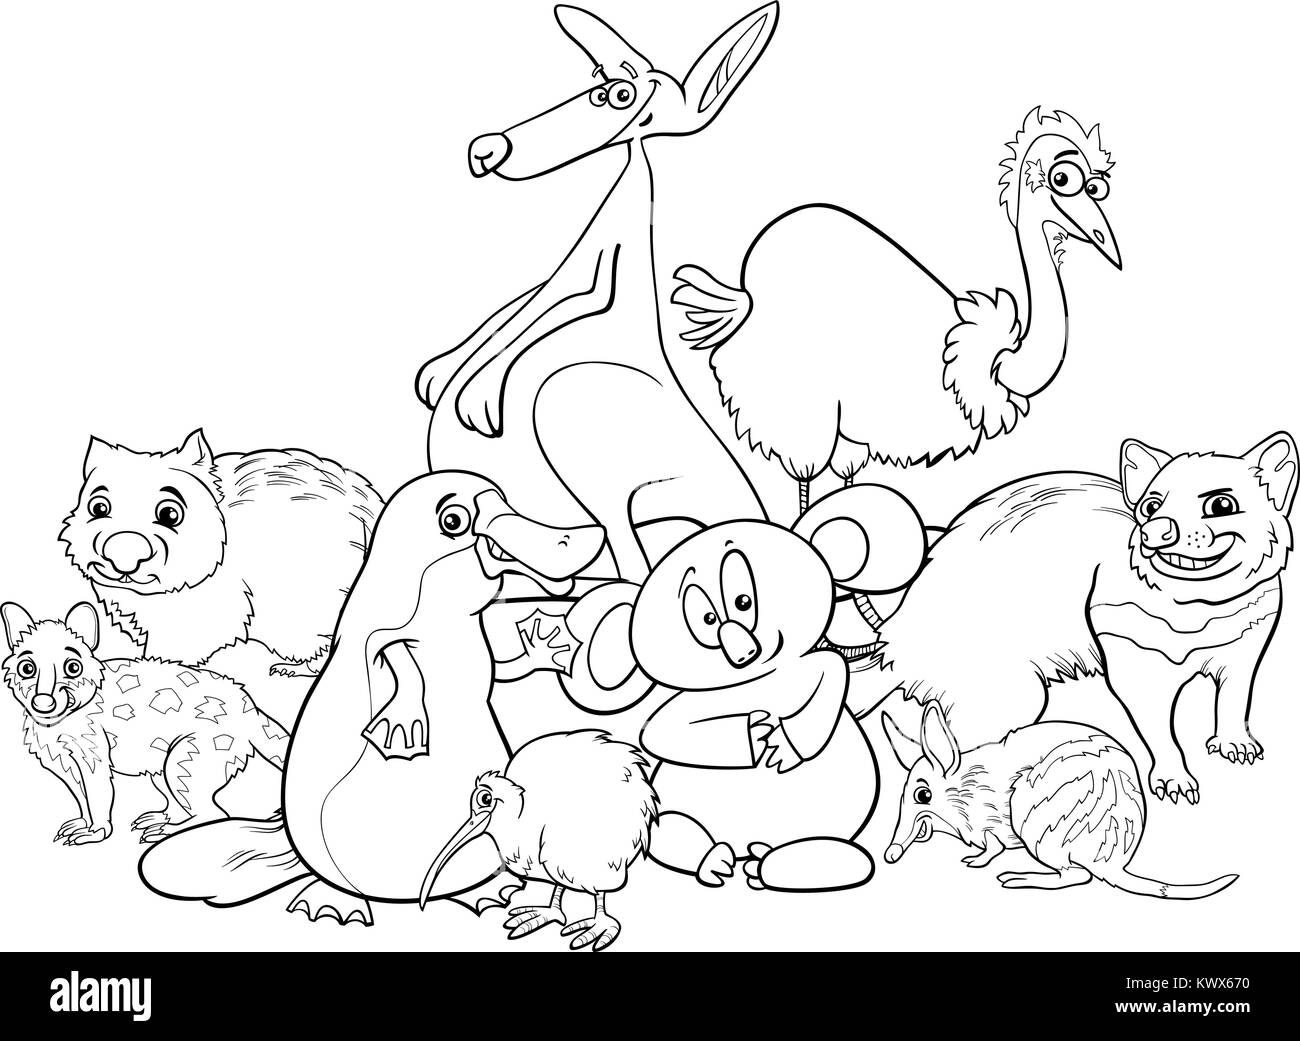 Black and White Cartoon Illustrations of Australian Animal Characters Group Coloring Book Stock Vector